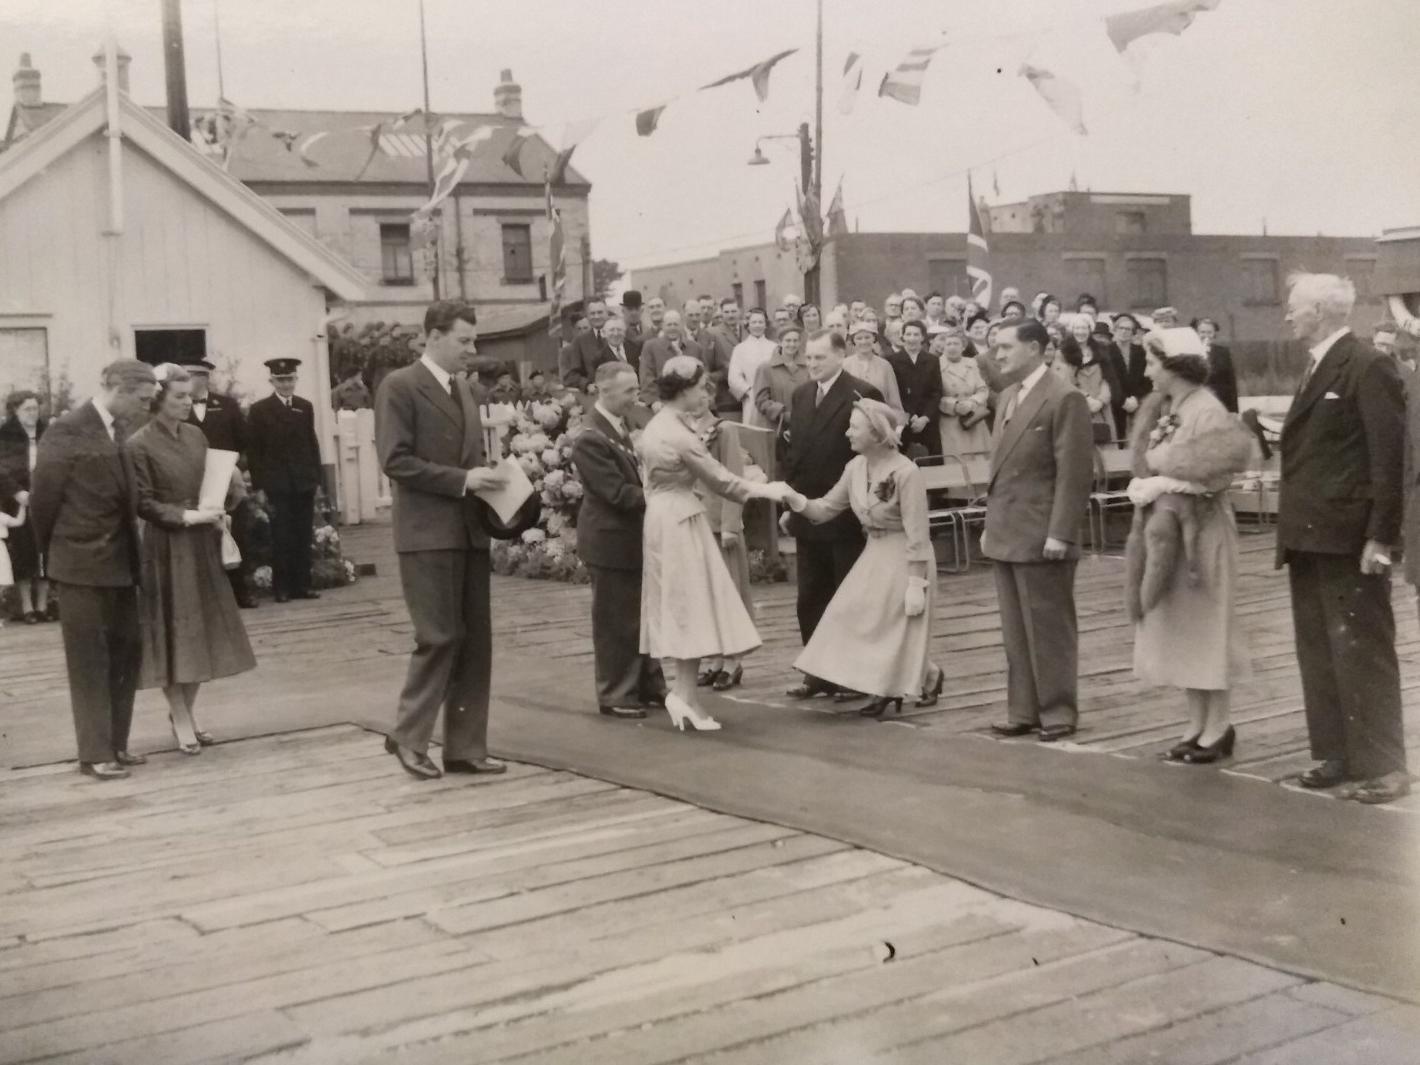 Princess Margaret meets dignitaries in Fleetwood during her visit to the port